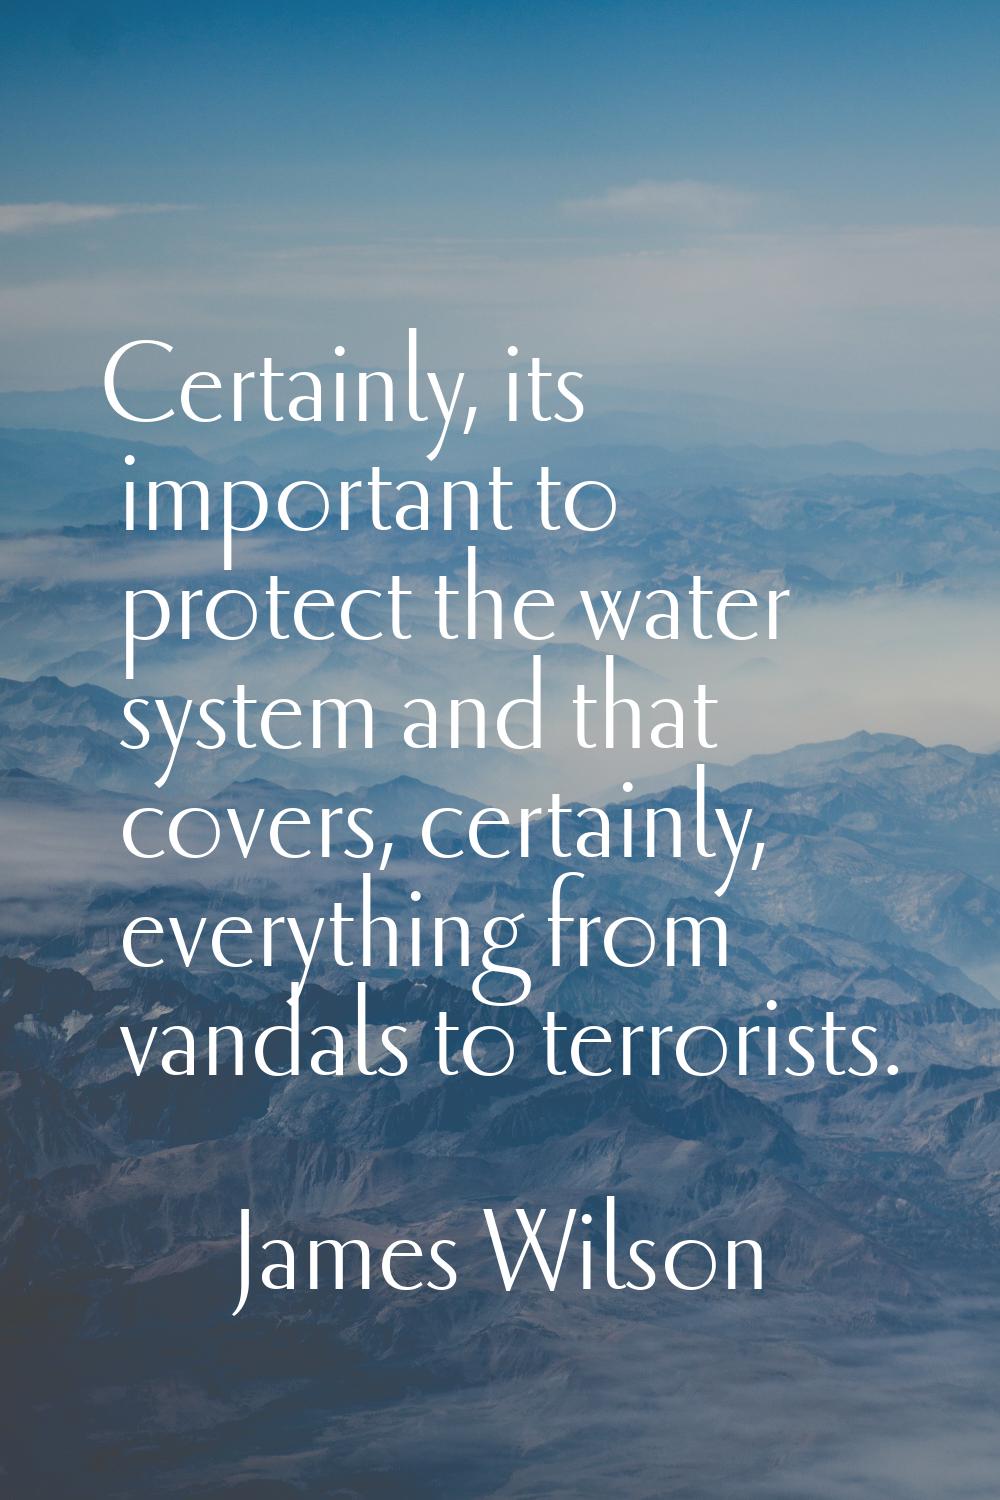 Certainly, its important to protect the water system and that covers, certainly, everything from va